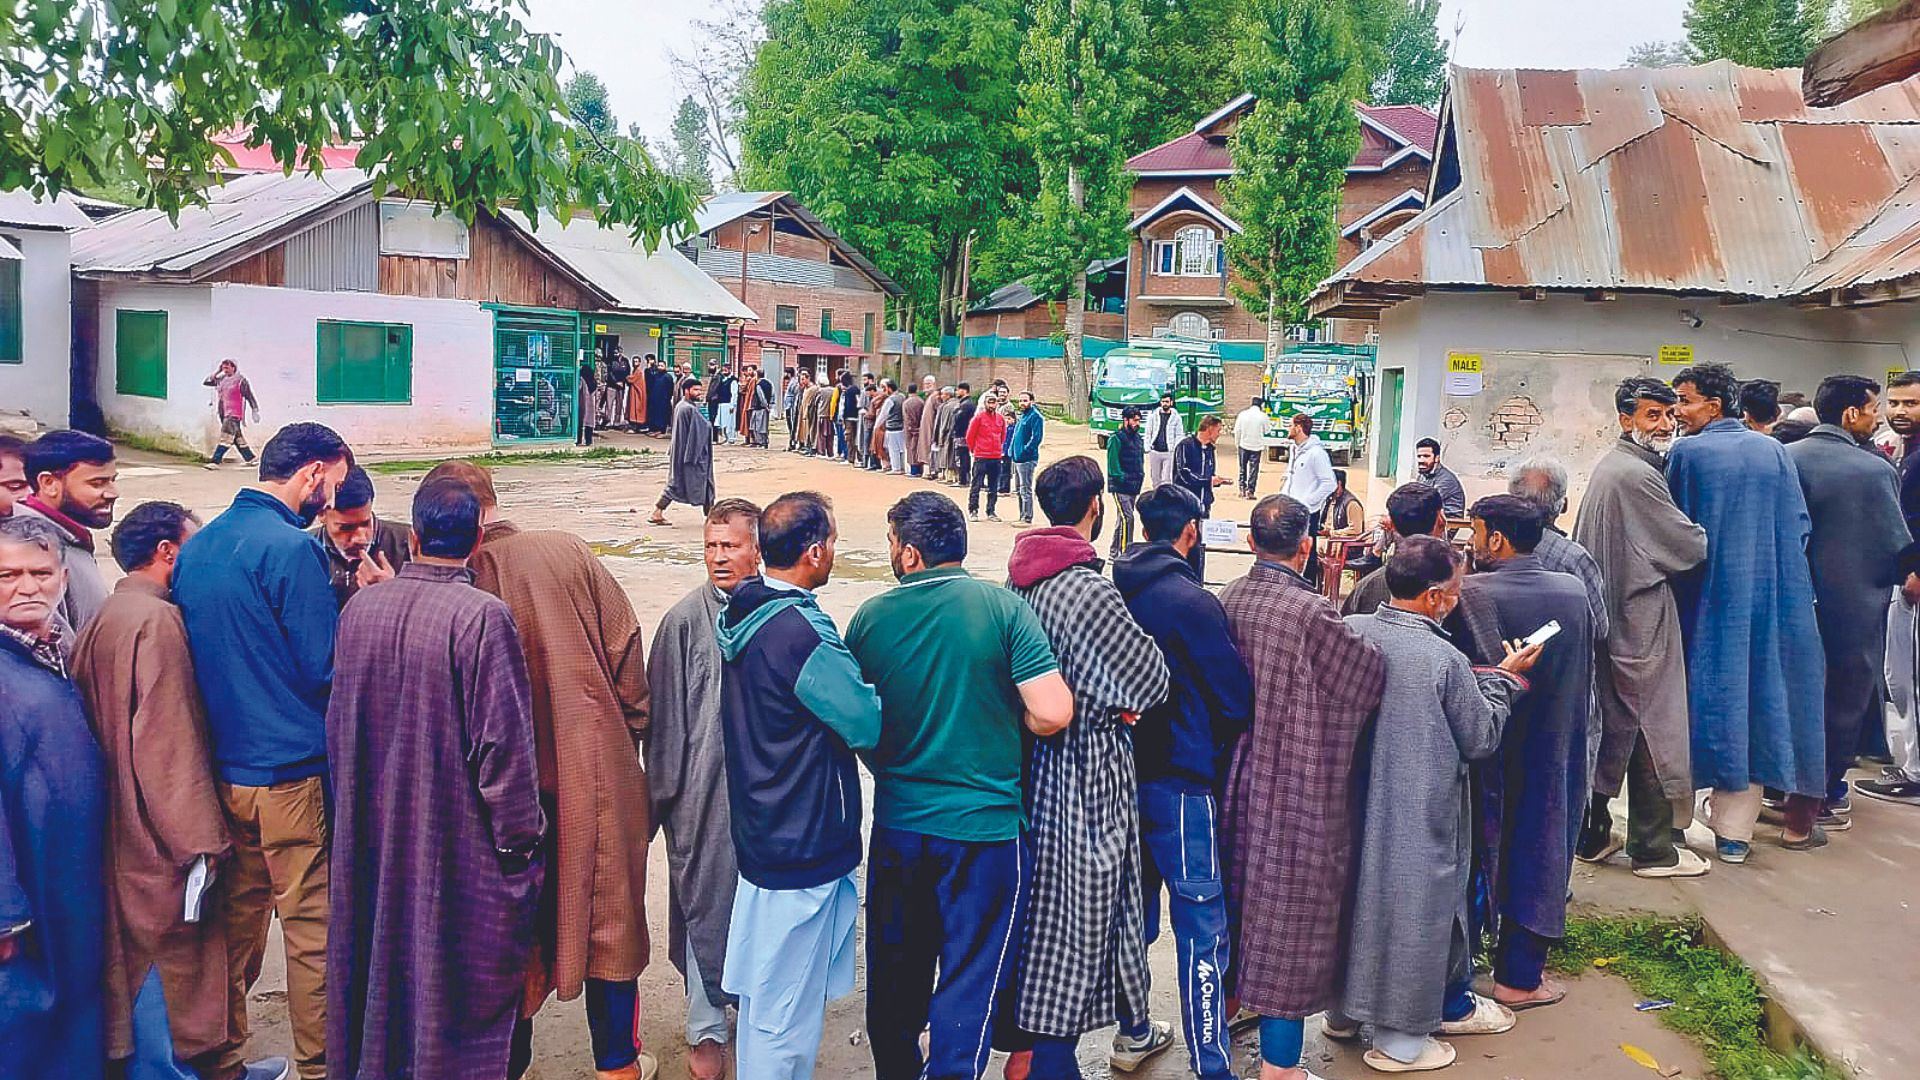 Kashmir is not protesting, it’s voting